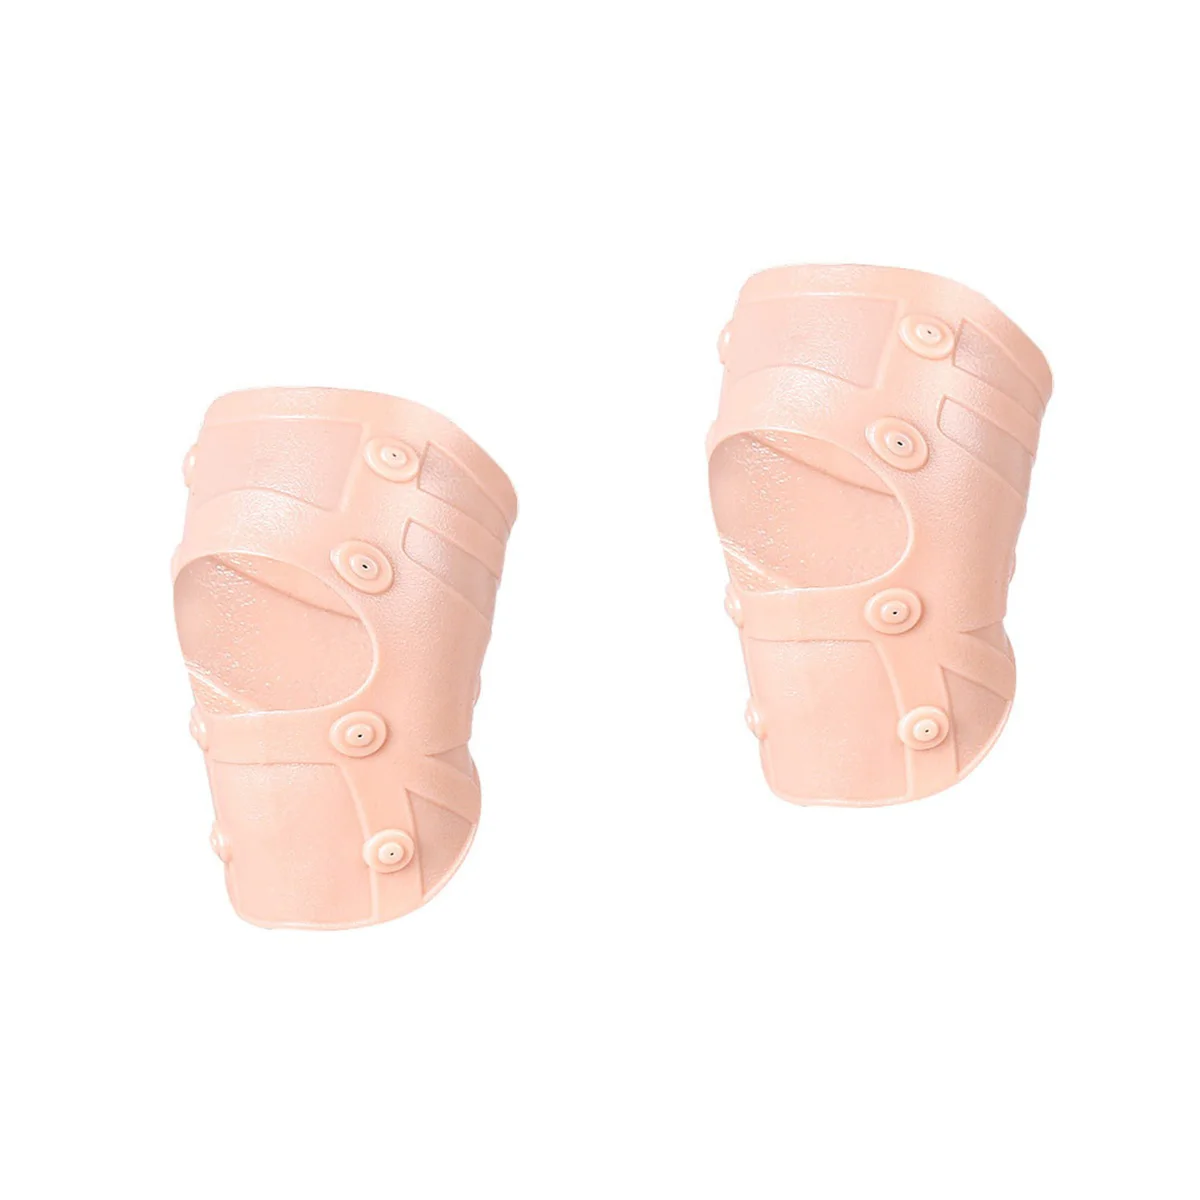 

2 pcs Practical Compression Knee Strap Magnet Sports Knee Pad Knee Protector (Ivory)